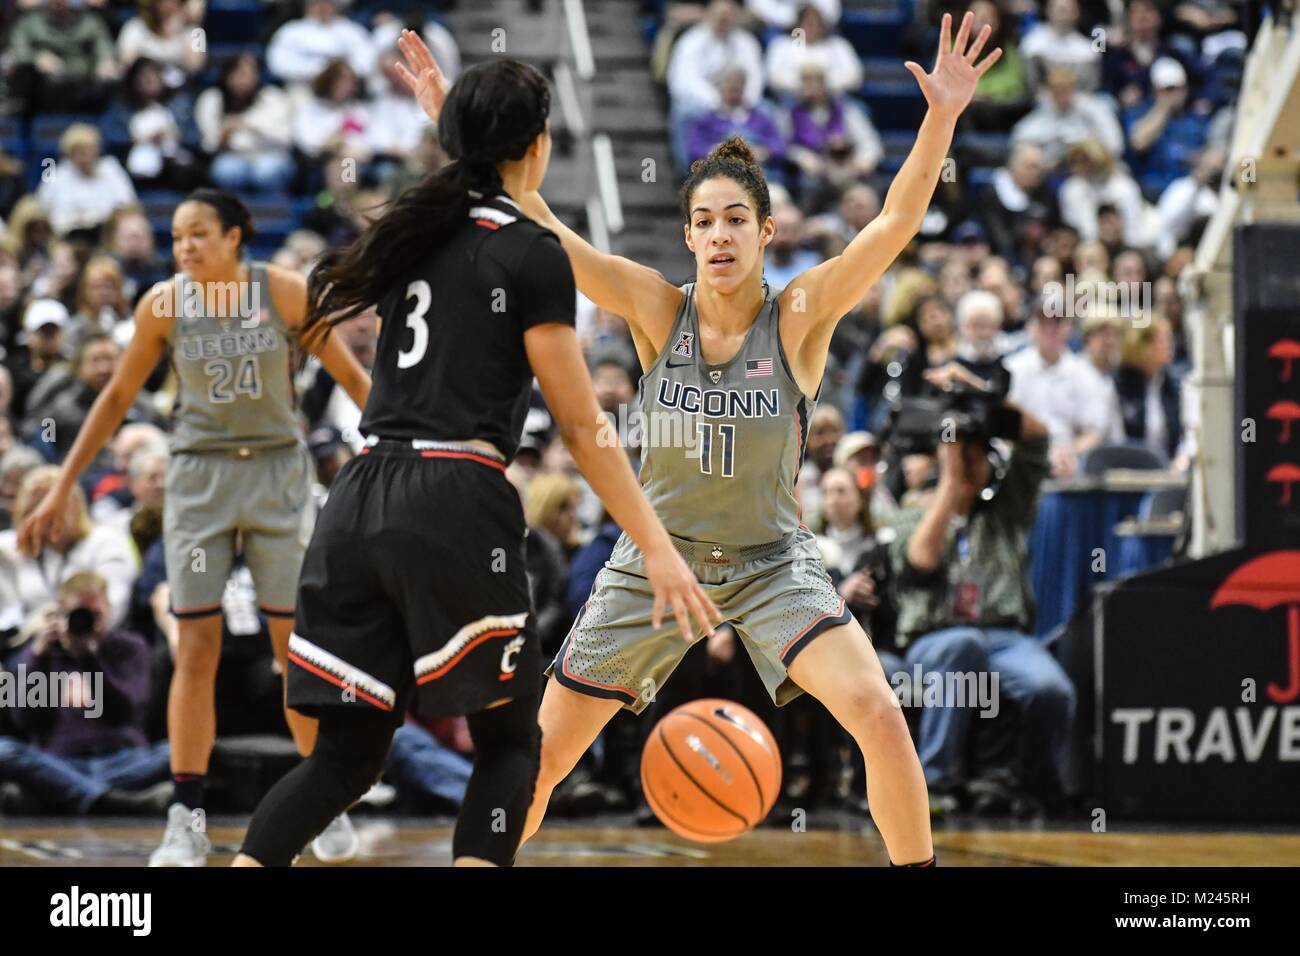 Hartford, CT, USA. 4th Feb, 2017. Kia Nurse (11) of the Uconn Huskies defends against Ana Owens (3) of the Cincinnati Bearcats at the XL Center in Hartford, CT. Gregory Vasil/CSM/Alamy Live News Stock Photo